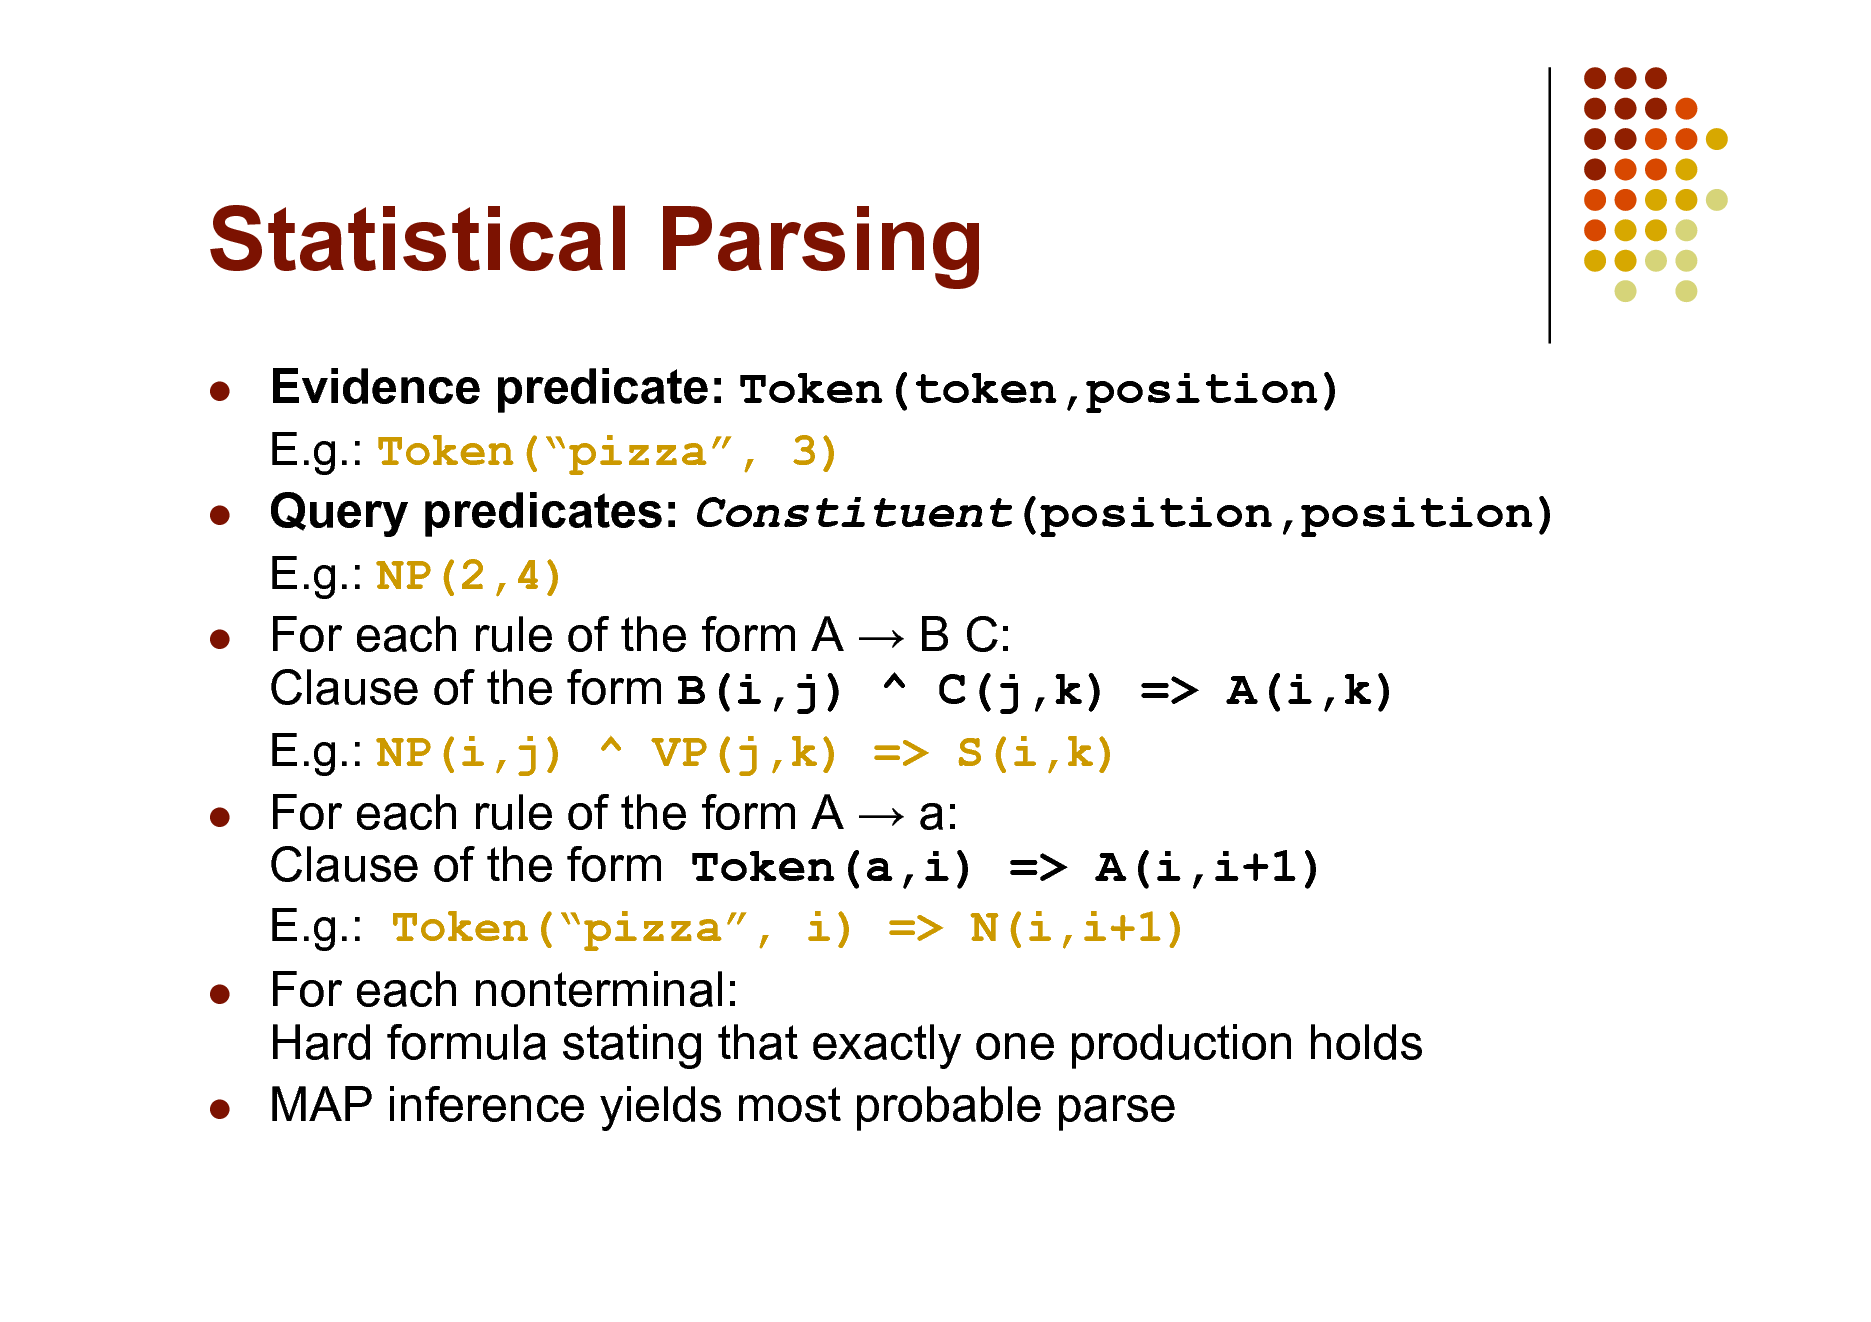 Slide: Statistical Parsing
 





 

Evidence predicate: Token(token,position) E.g.: Token(pizza, 3) Query predicates: Constituent(position,position) E.g.: NP(2,4) For each rule of the form A  B C: Clause of the form B(i,j) ^ C(j,k) => A(i,k) E.g.: NP(i,j) ^ VP(j,k) => S(i,k) For each rule of the form A  a: Clause of the form Token(a,i) => A(i,i+1) E.g.: Token(pizza, i) => N(i,i+1) For each nonterminal: Hard formula stating that exactly one production holds MAP inference yields most probable parse

